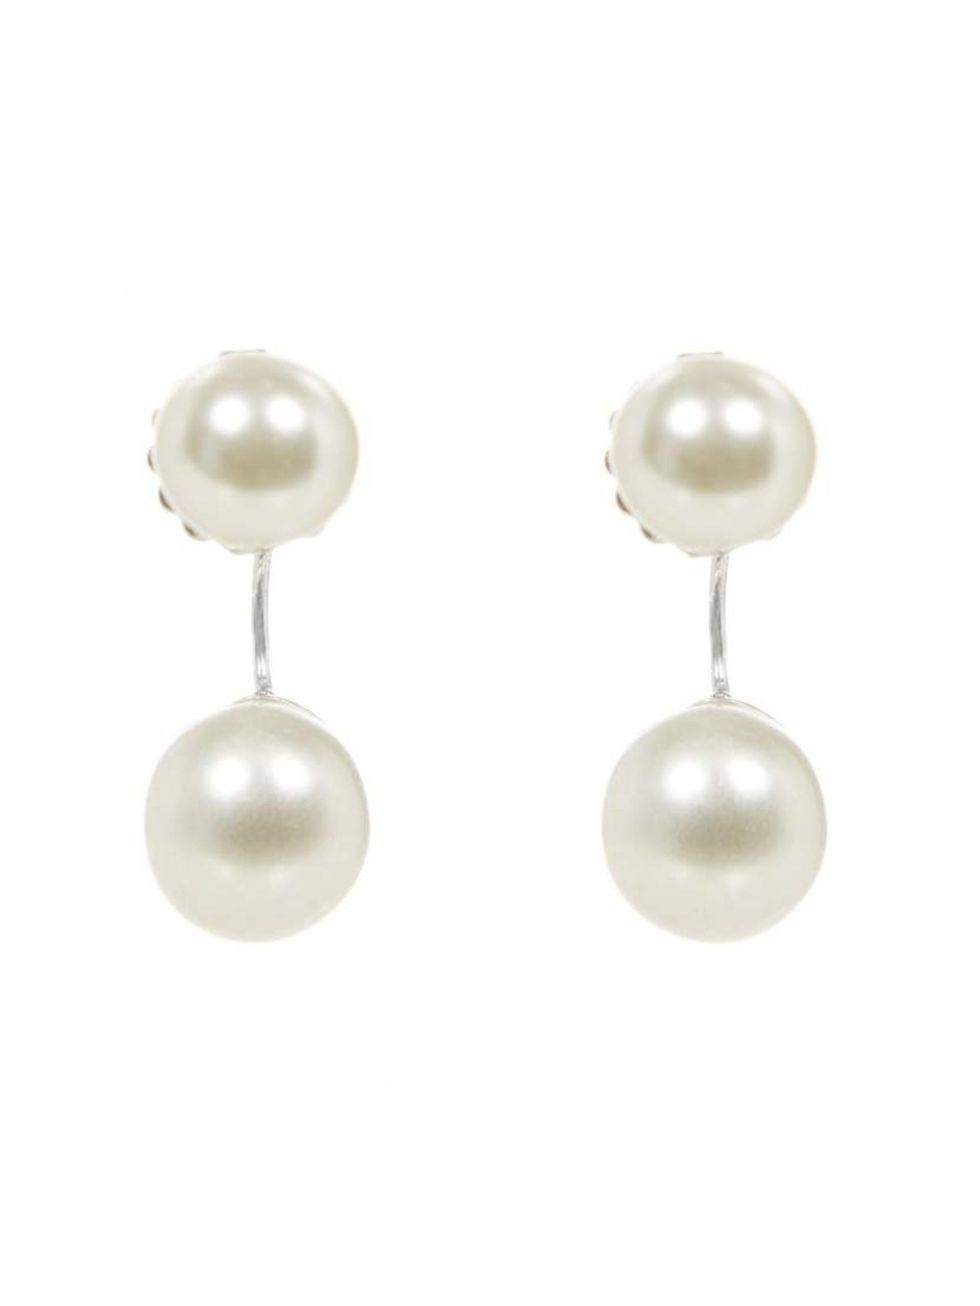 <p>Wear just one of these pearl earrings for a modern take - Fashion Assistants Chloe Bloch and Charlie Gowans-Eglinton are splitting a pair.</p><p><a href="http://www.hobbs.co.uk/product/display?productID=0114-127E-100900&refpage=jewellery">Hobbs</a> ear